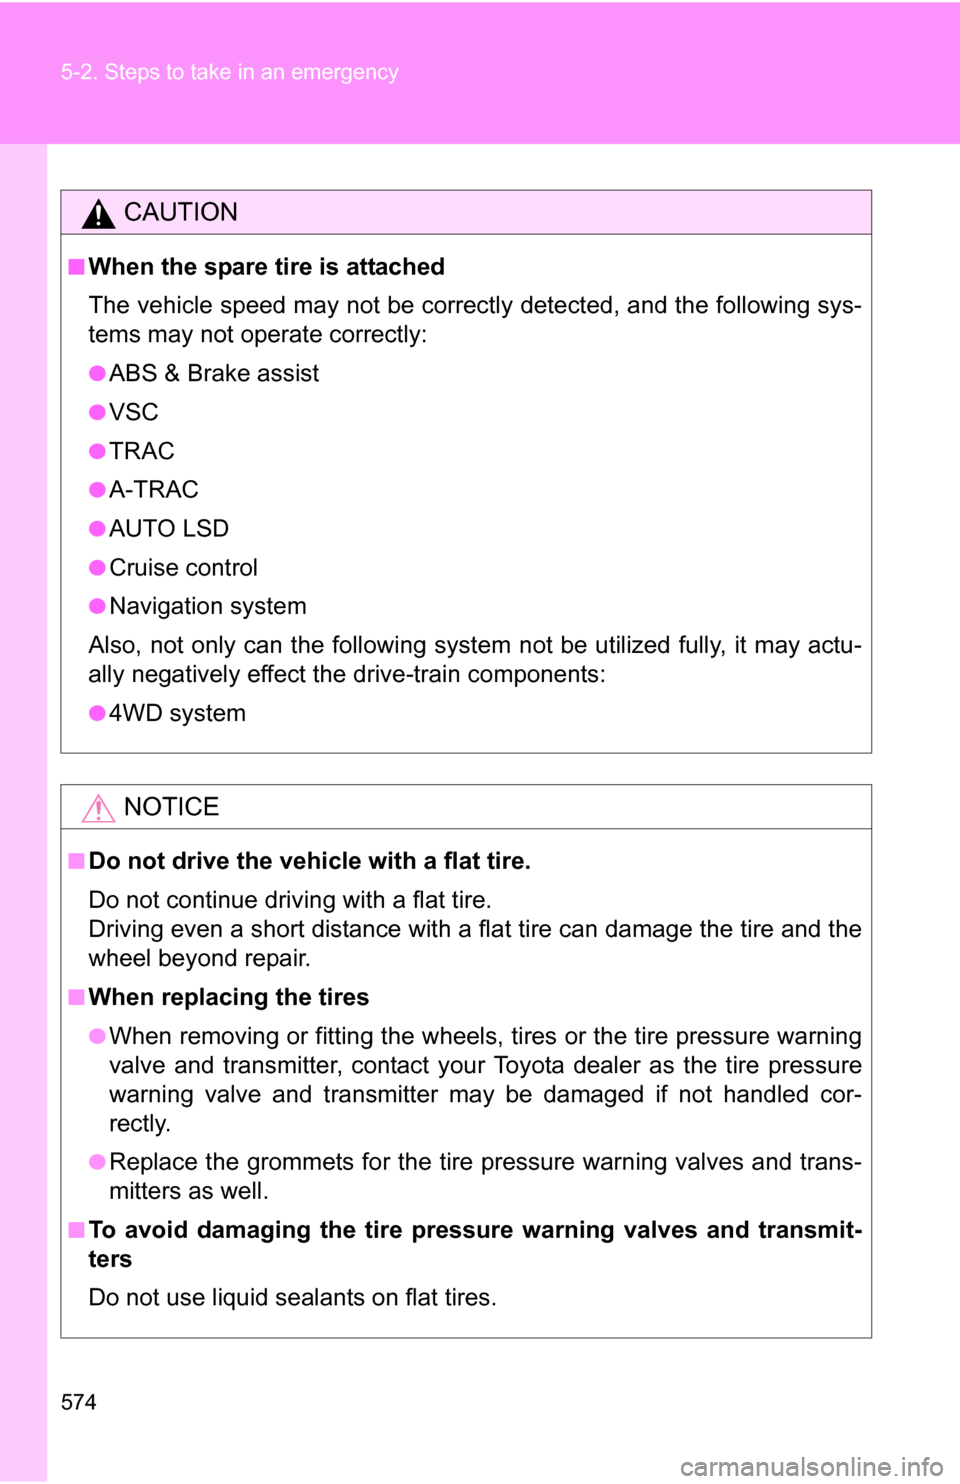 TOYOTA TUNDRA 2009 2.G Owners Manual 574 5-2. Steps to take in an emergency
CAUTION
■When the spare tire is attached
The vehicle speed may not be correctly detected, and the following sys-
tems may not operate correctly:
●ABS & Brake